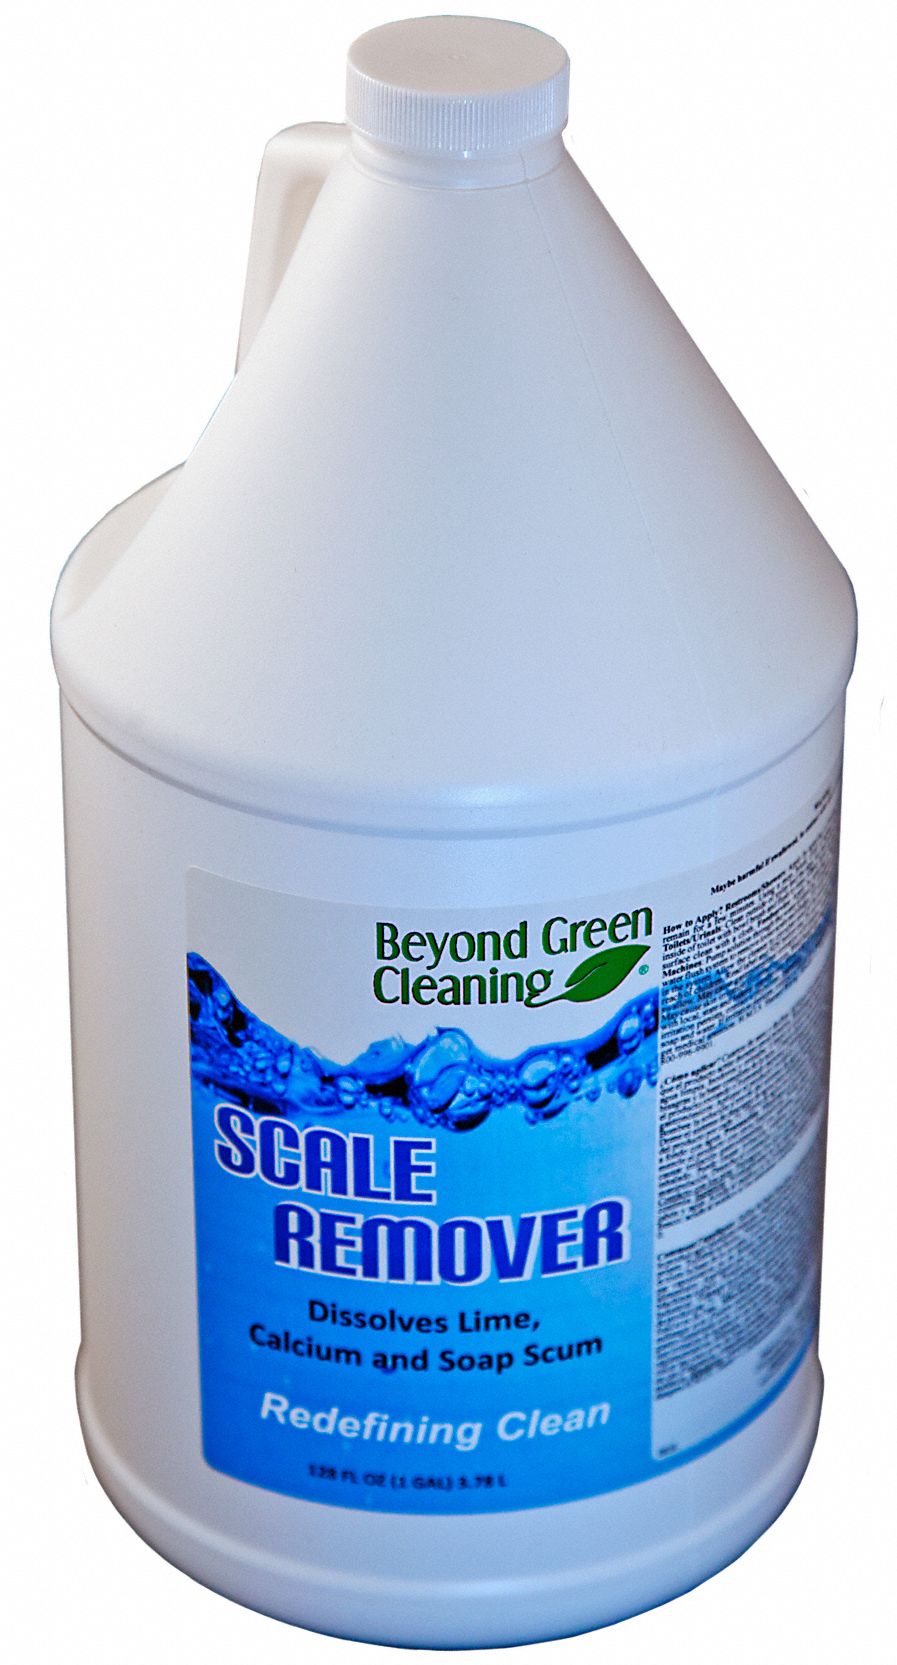 Scale Remover: Jug, 1 gal Container Size, Ready to Use, Liquid, 4 PK